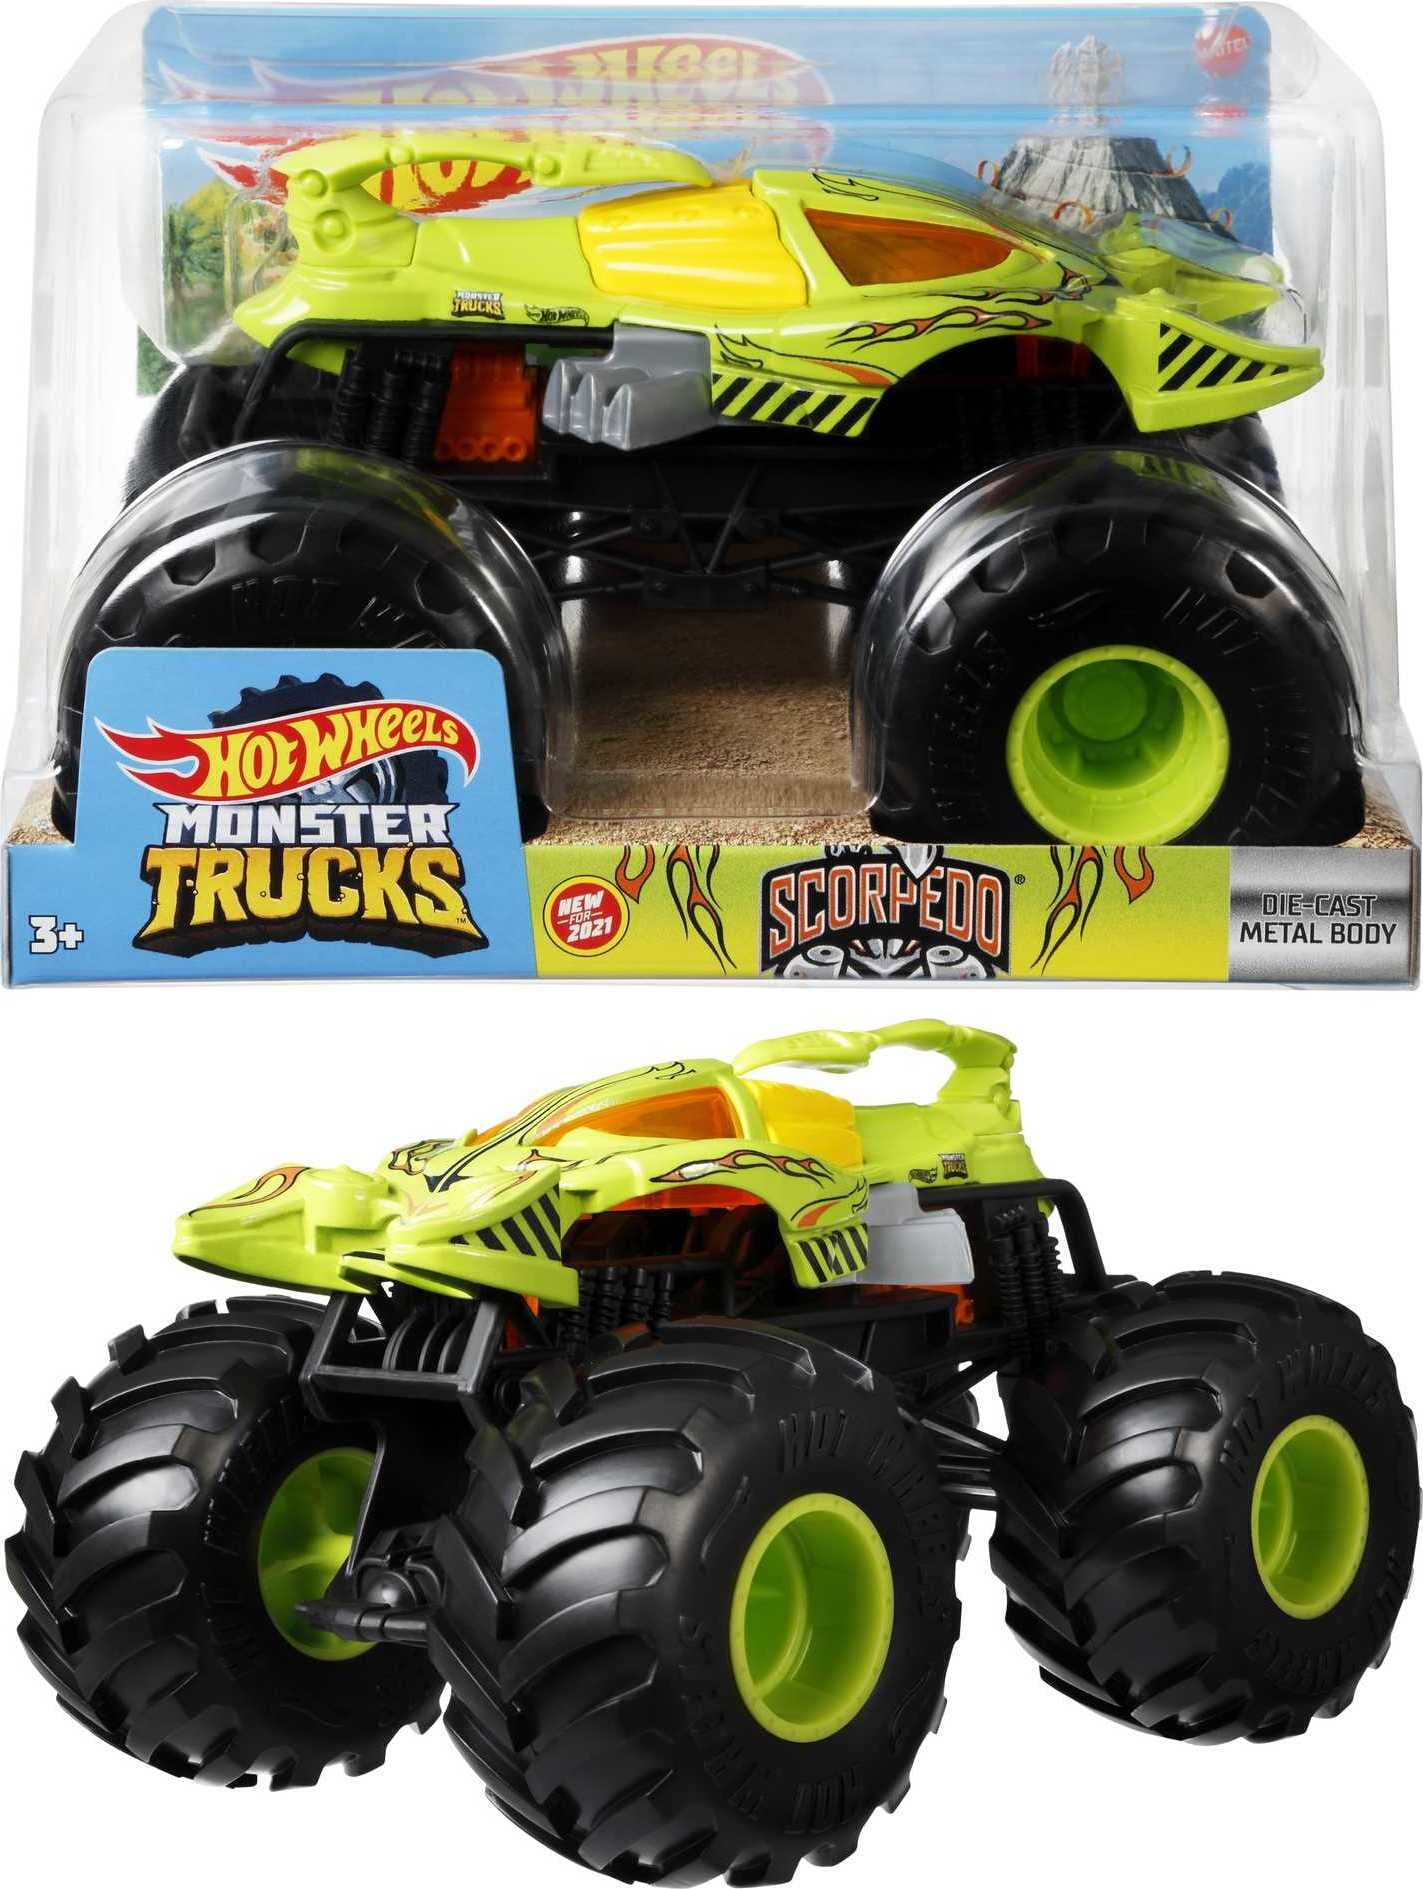 Hot Wheels Monster Trucks 1:24 Scale Vehicles, Collectible Die-Cast Toy  Trucks 